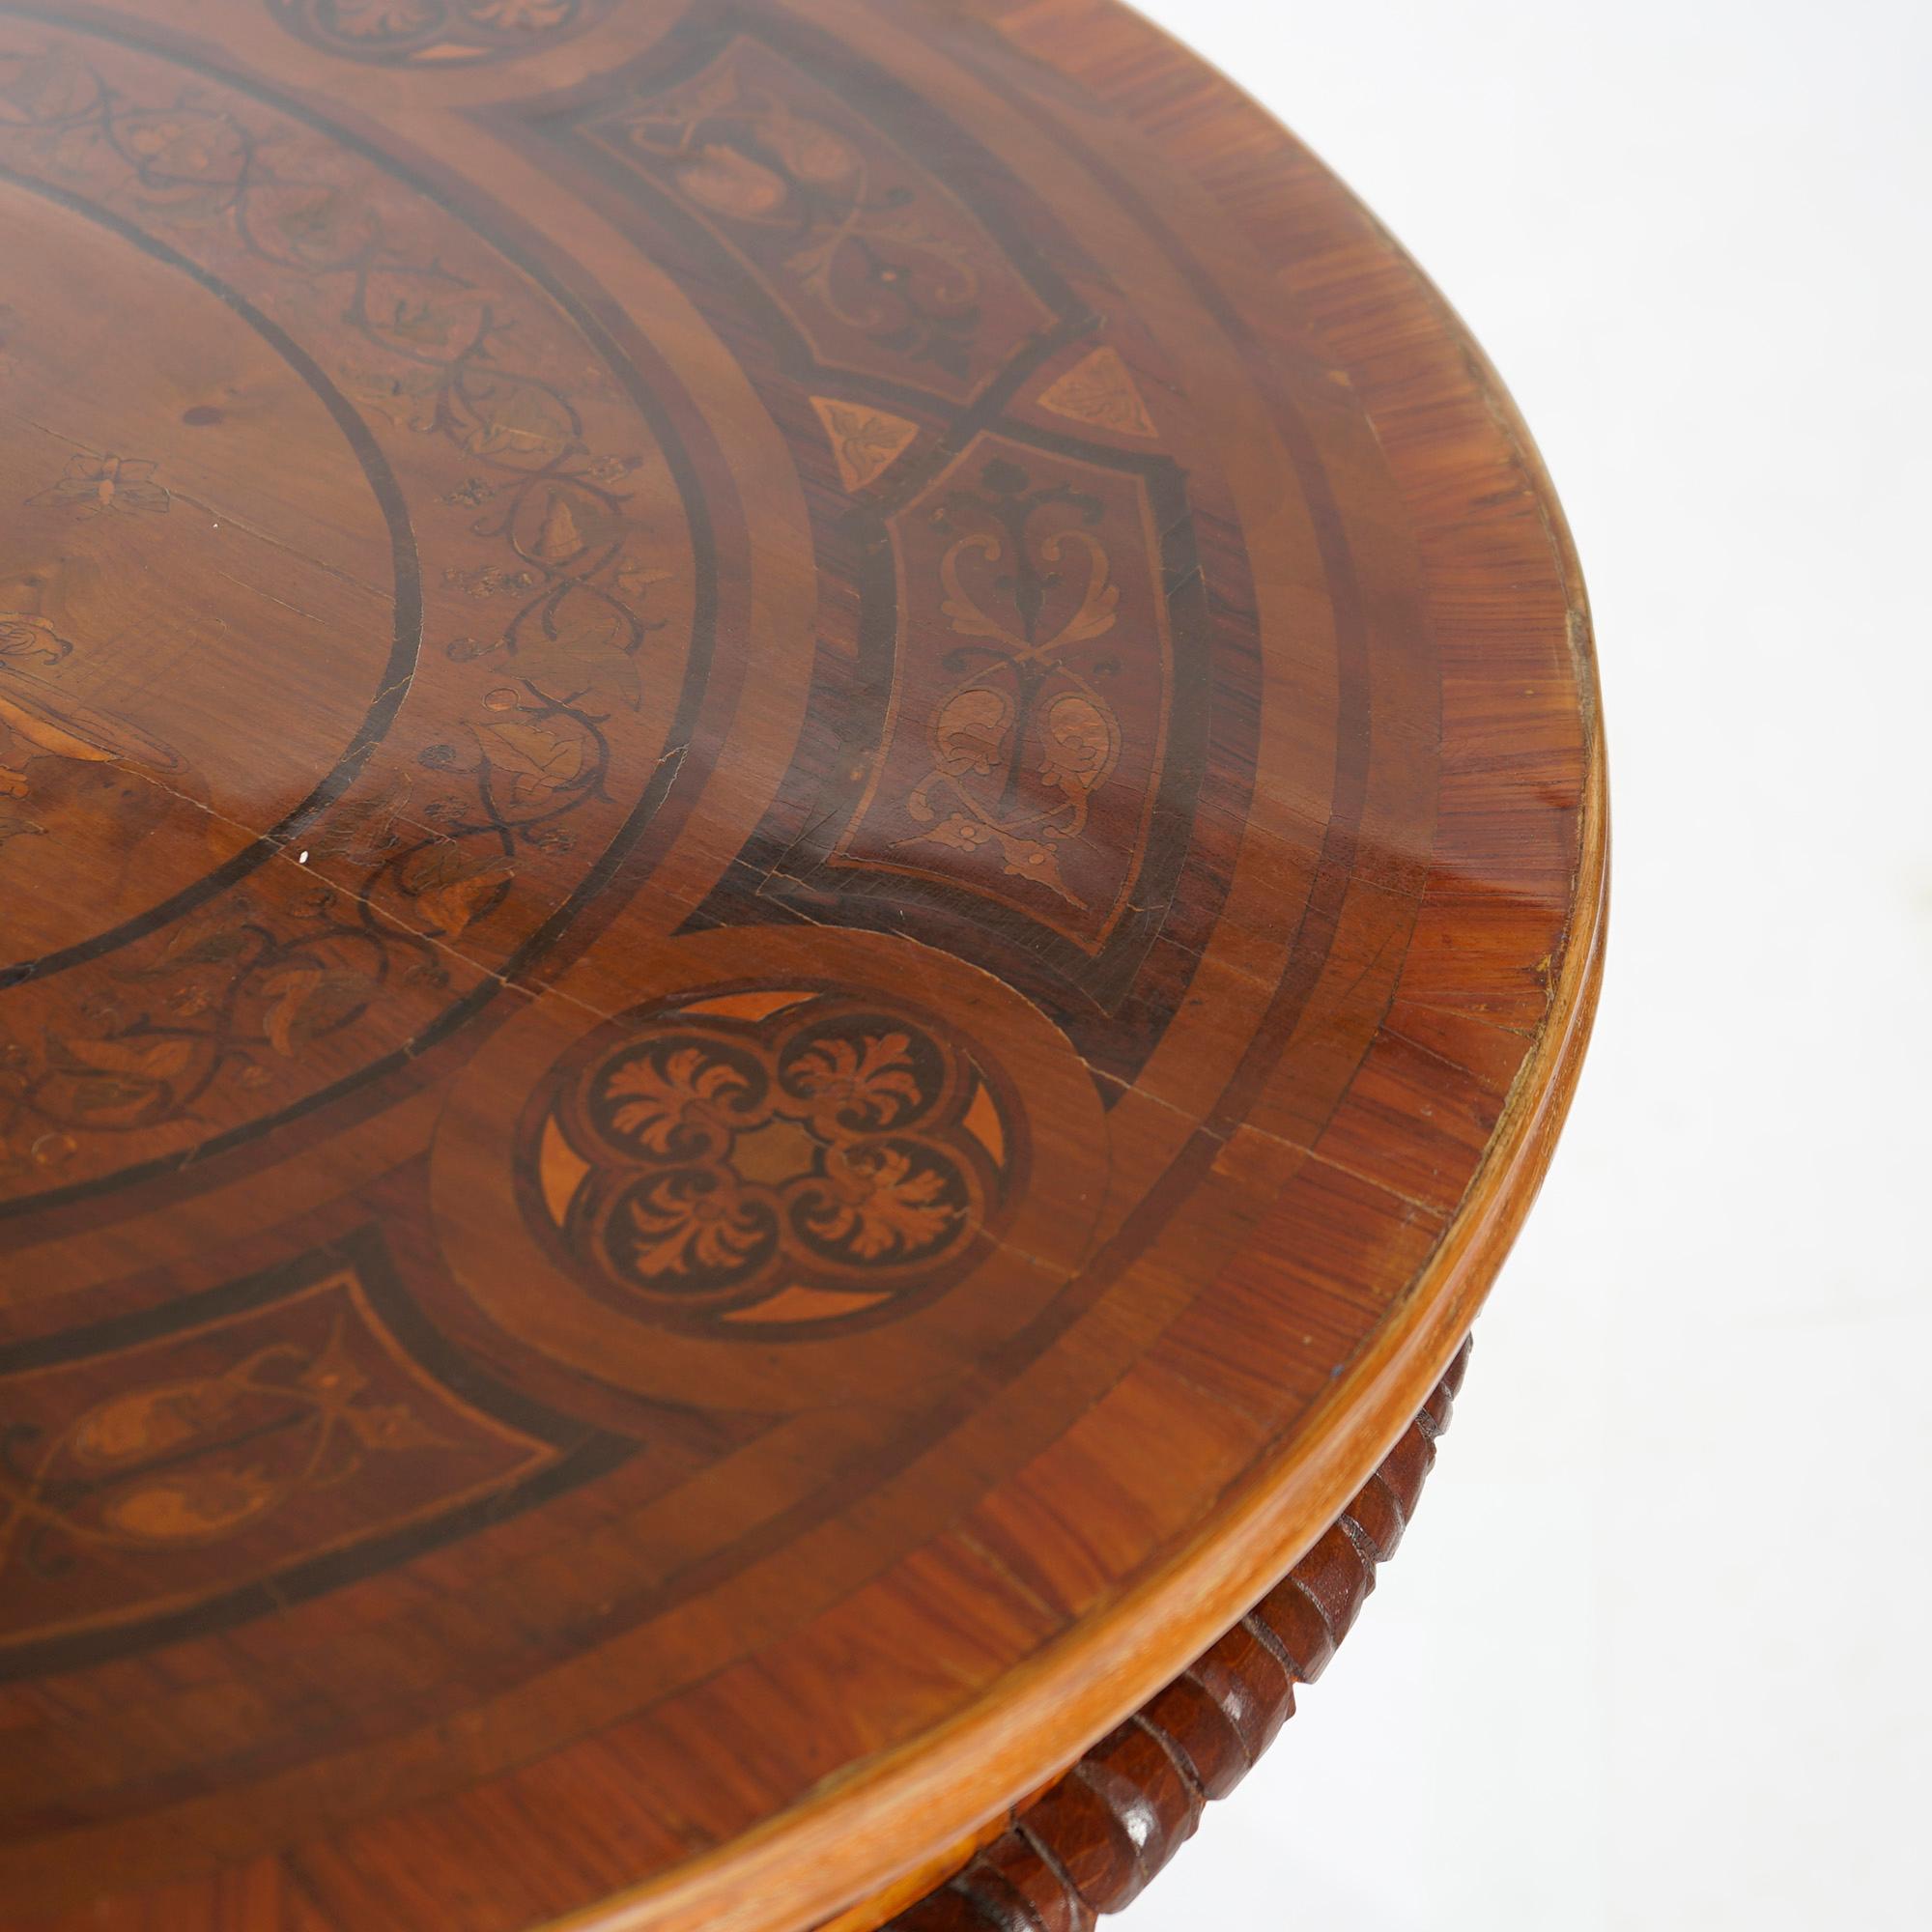 Antique Classical Marquetry Inlaid & Figural Carved Kingwood Center Table 19th C For Sale 5